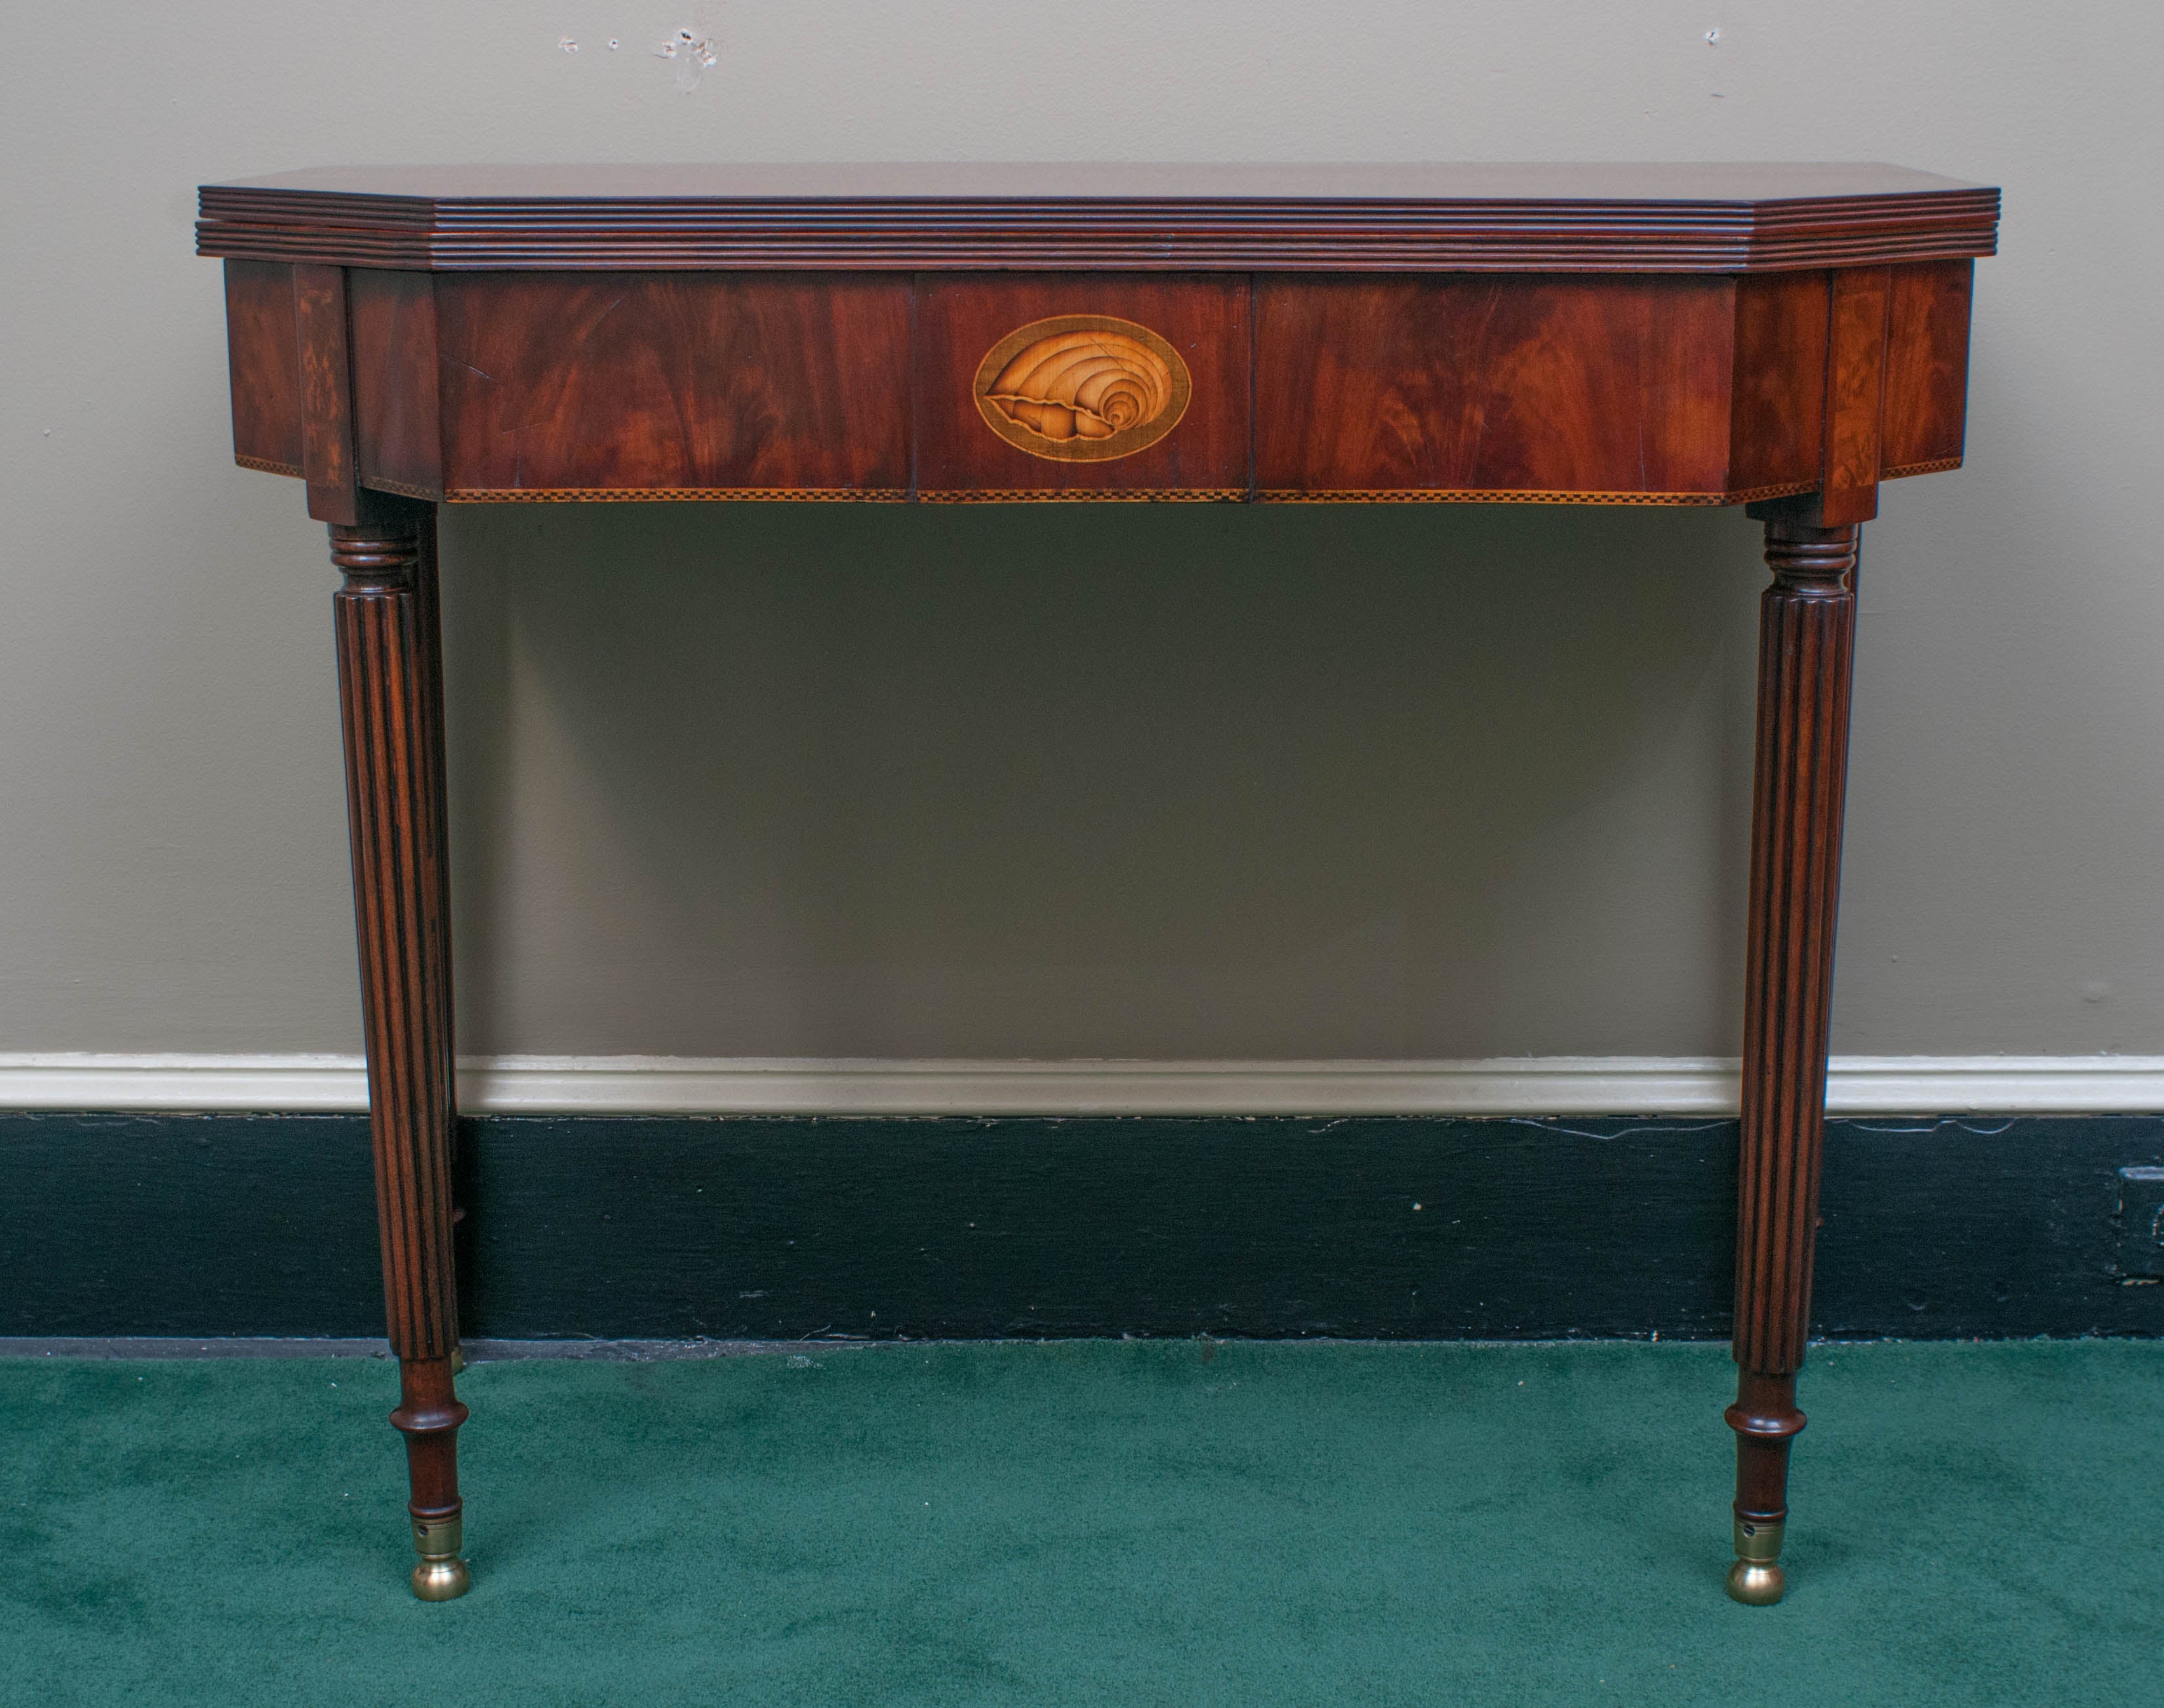 Federal Card Table with Conch Shell Inlay and Brass Ball Feet, circa 1805